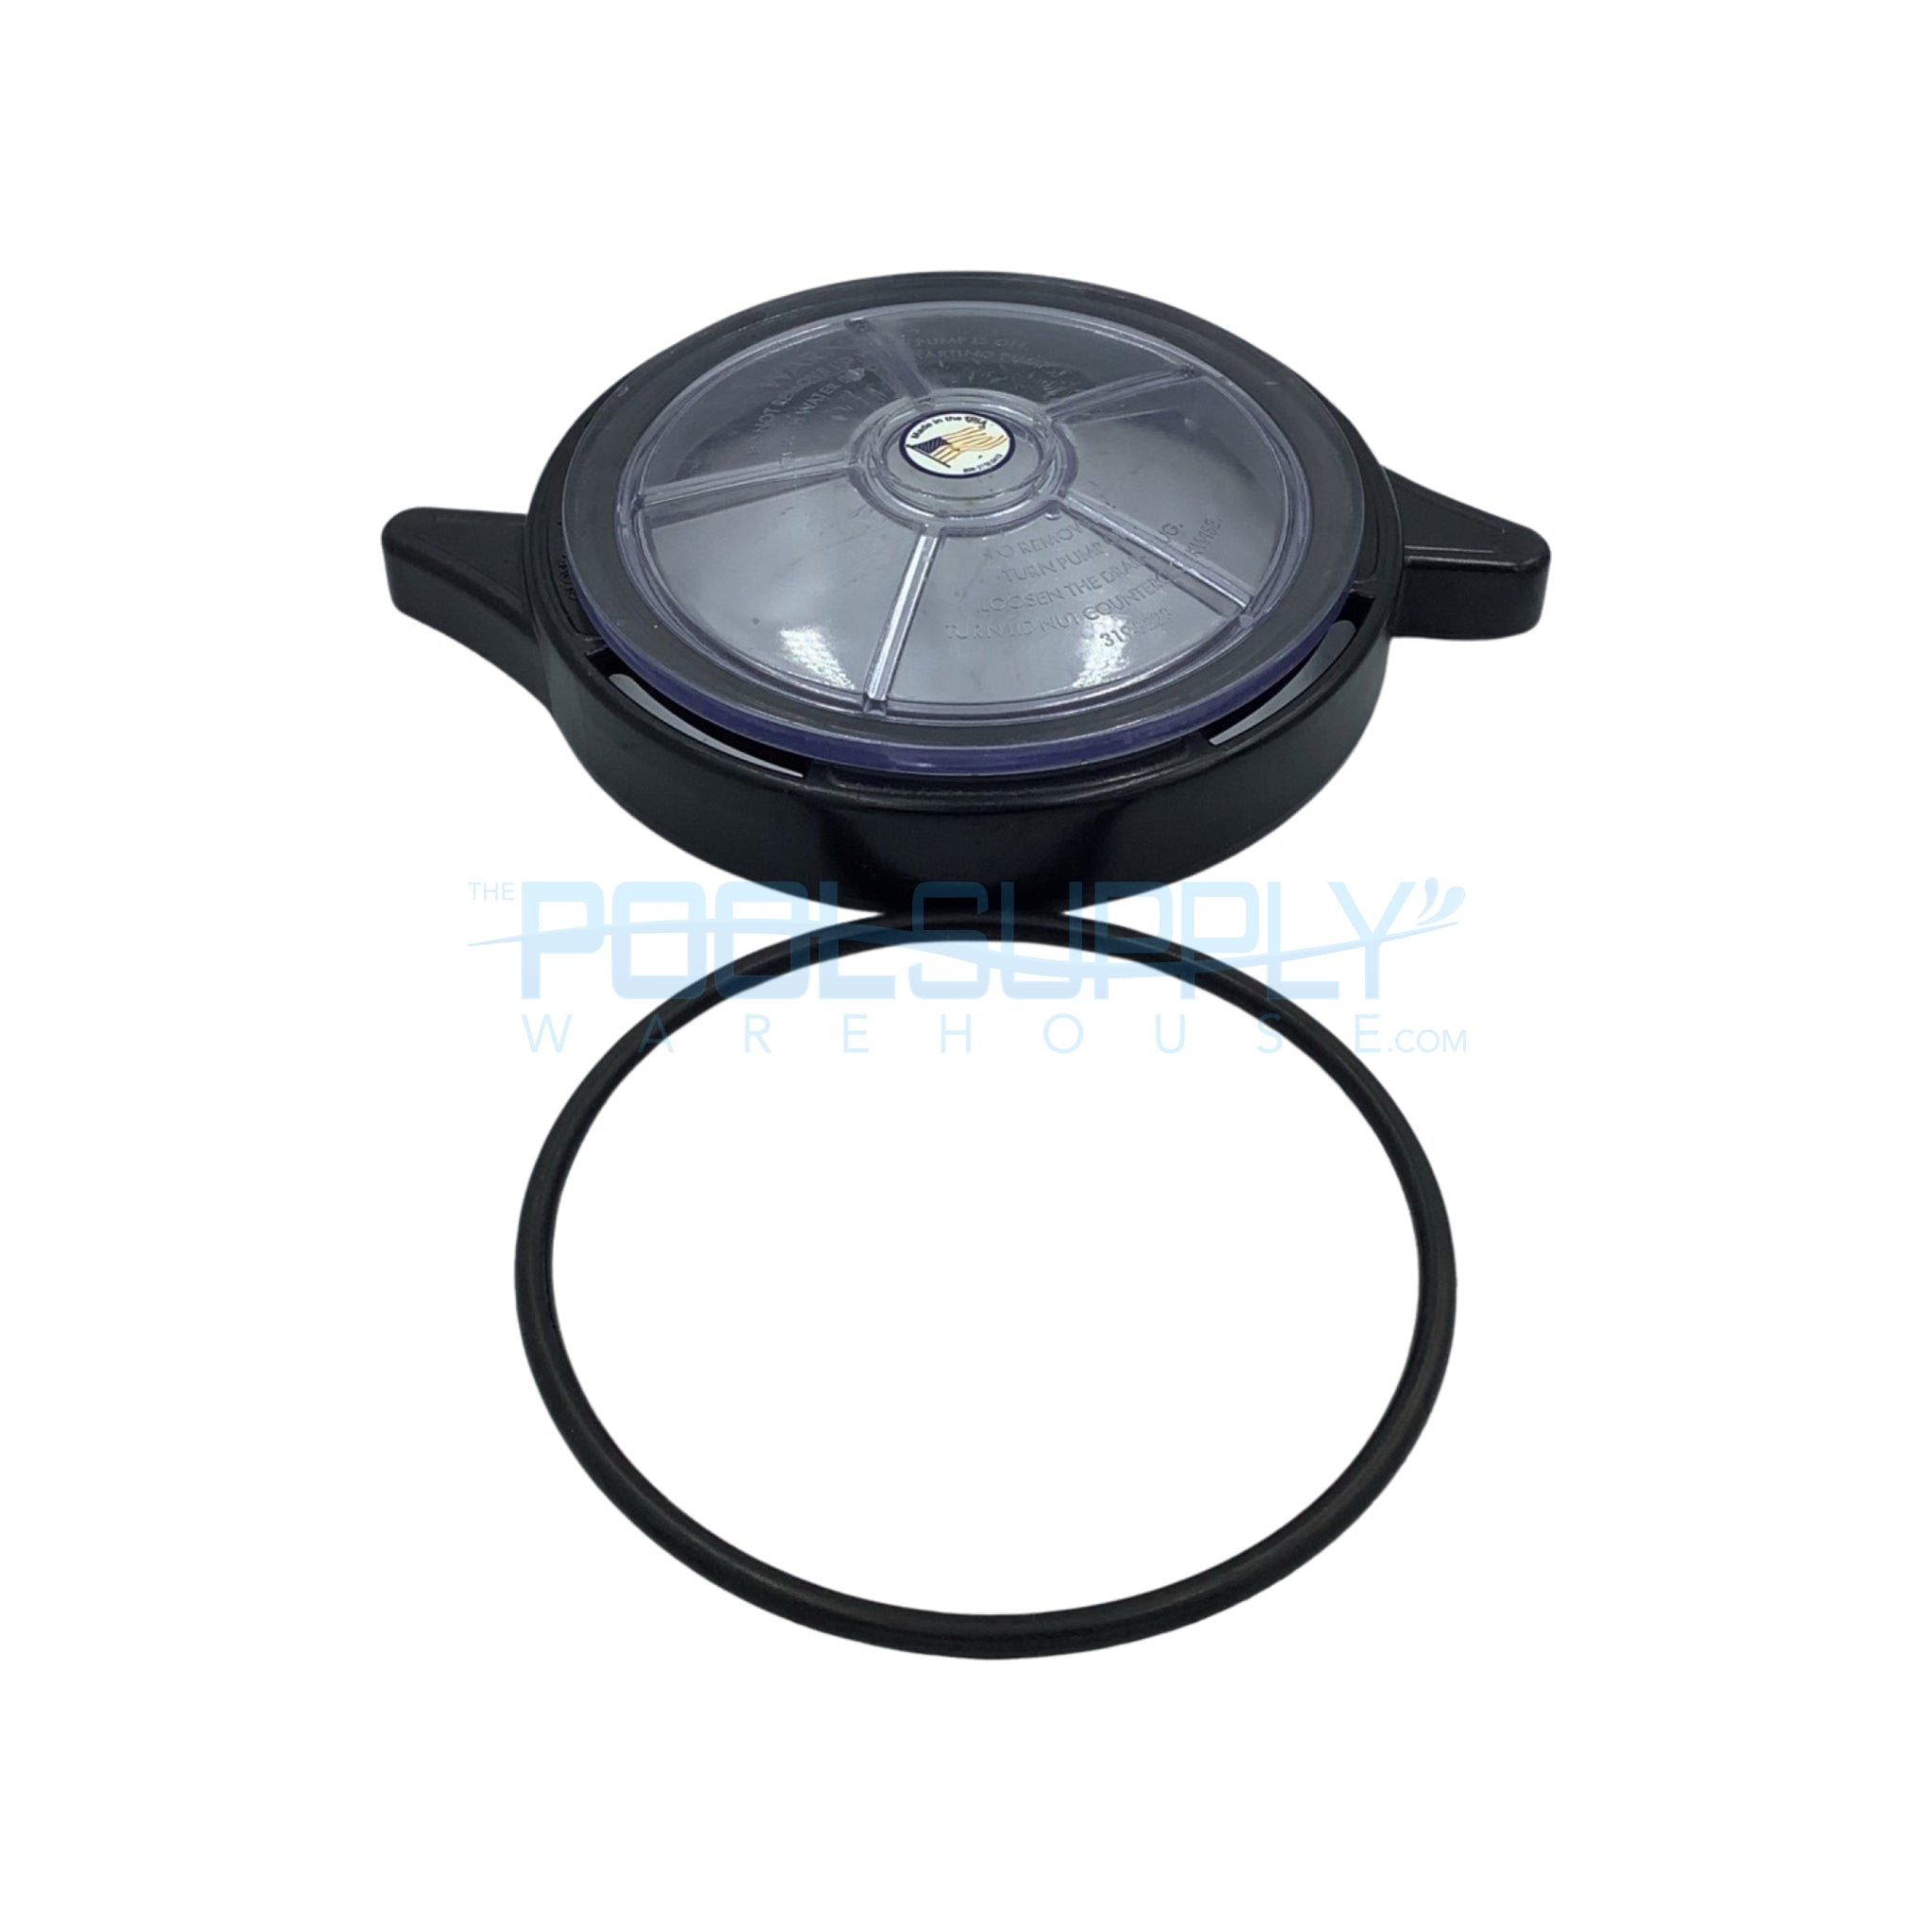 Waterway Champion/SMF Pump Lid & Nut & O-Ring - 319-4100 - The Pool Supply Warehouse